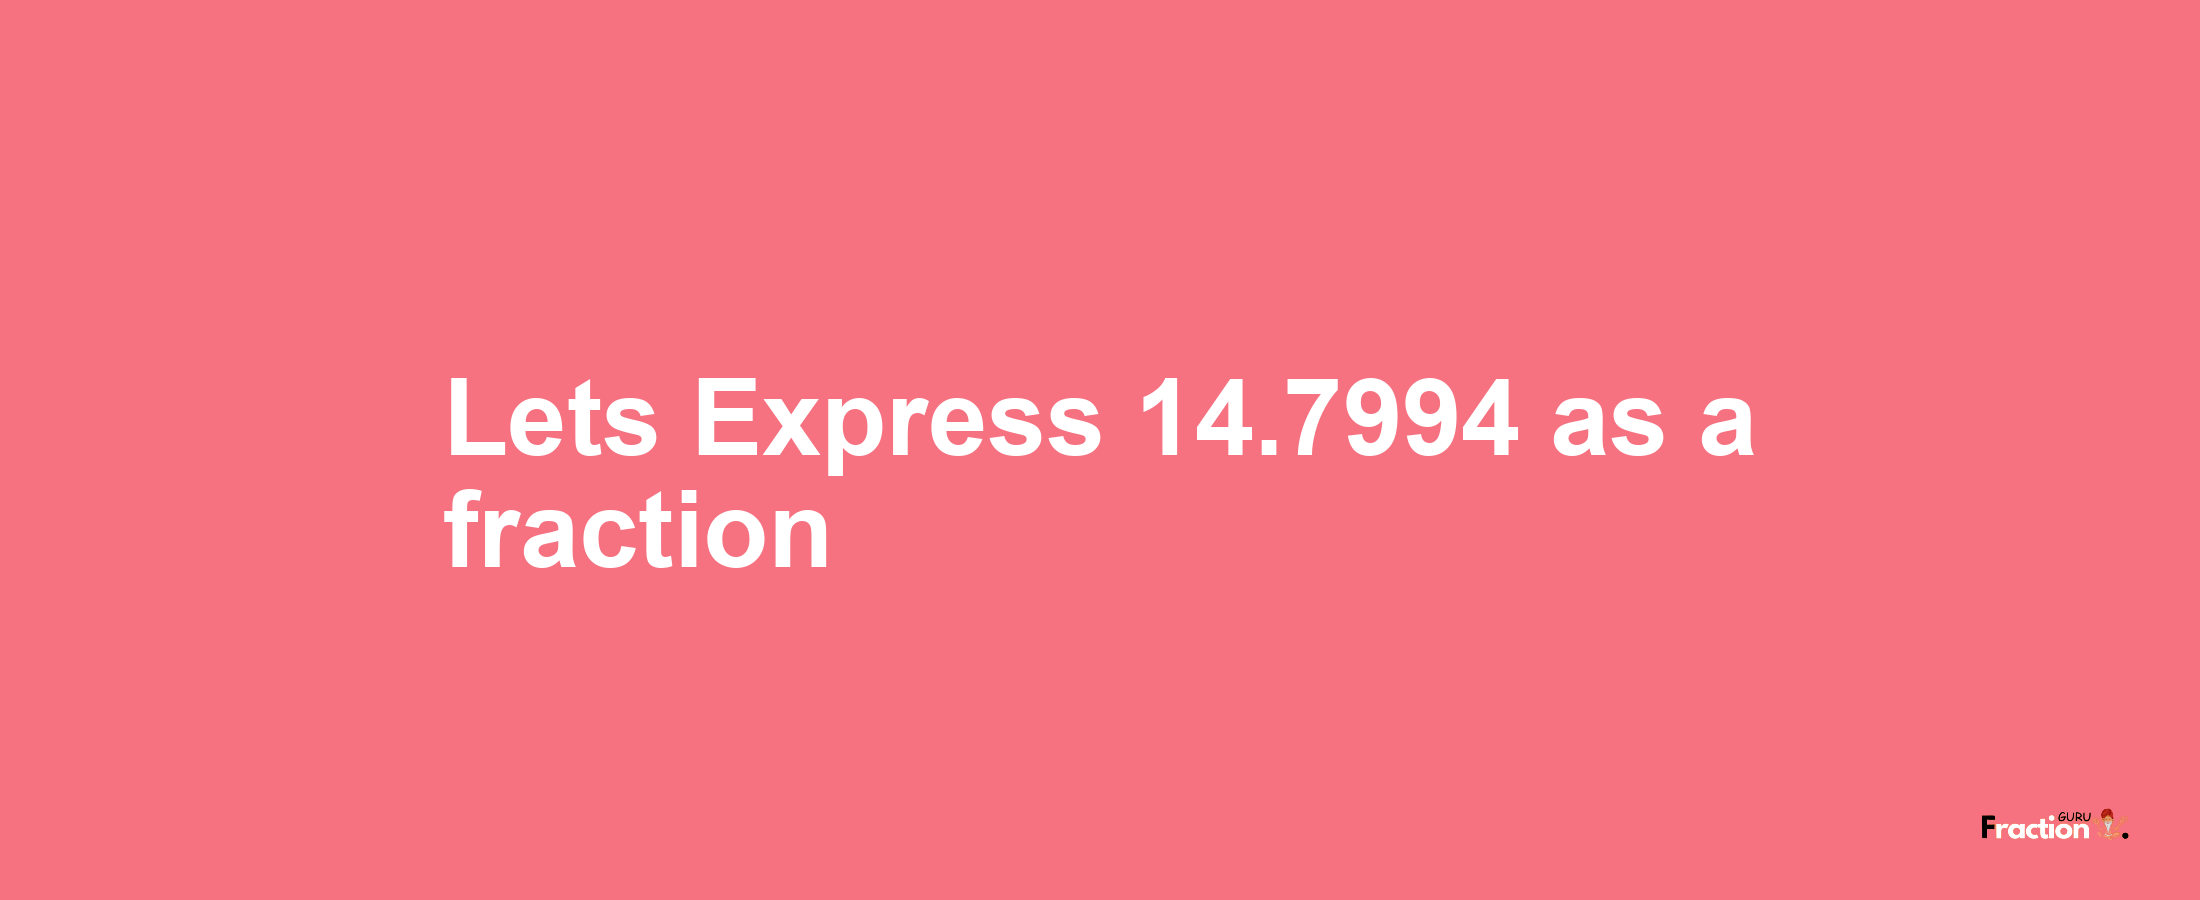 Lets Express 14.7994 as afraction